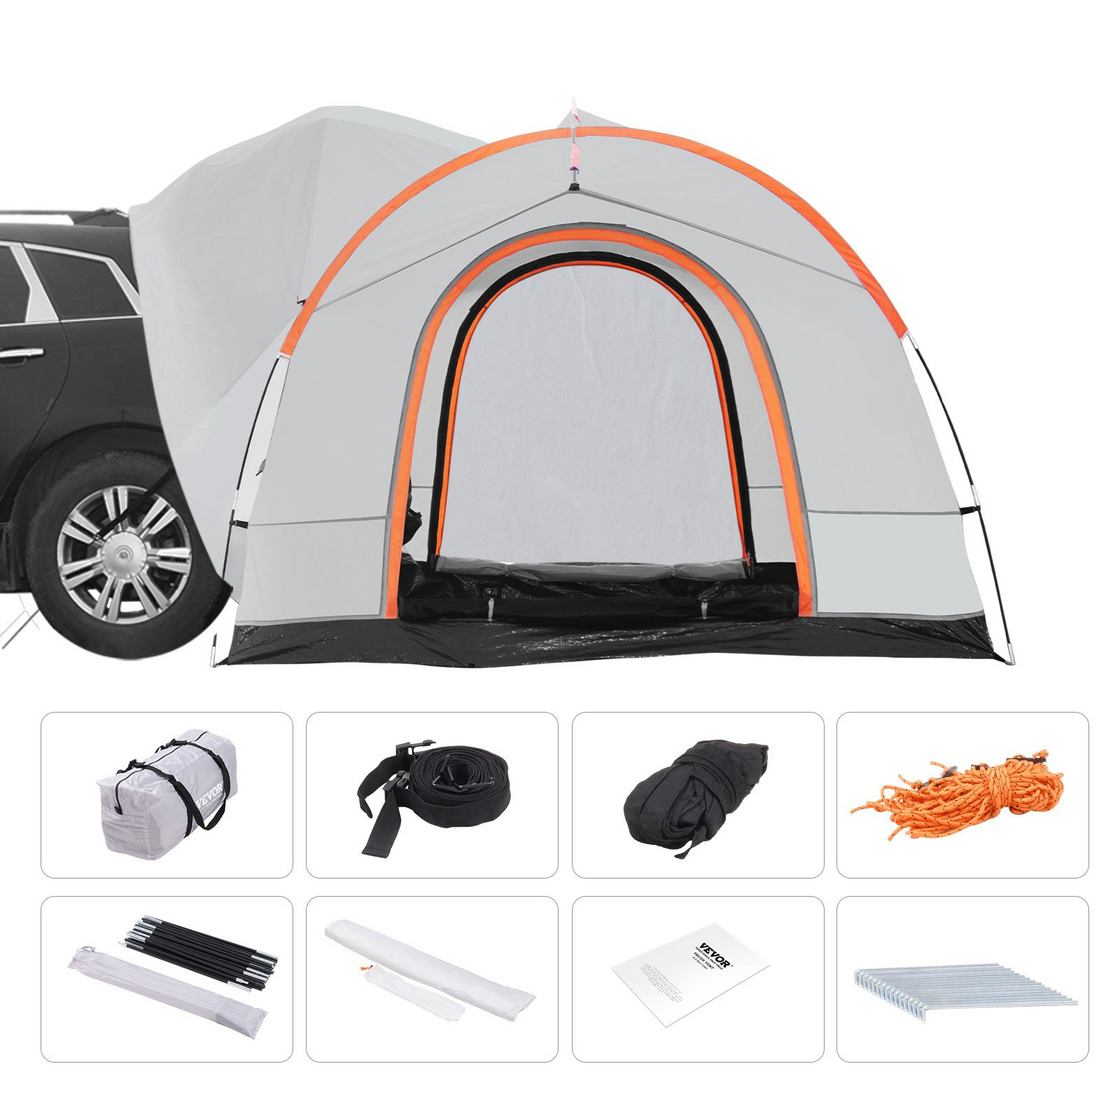 VEVOR SUV Camping Tent, 8'-8' SUV Tent Attachment for Camping with Rain Layer and Carry Bag, PU2000mm Double Layer Truck Tent, Accommodate 6-8 Person, Rear Tent for Van Hatch Tailgate